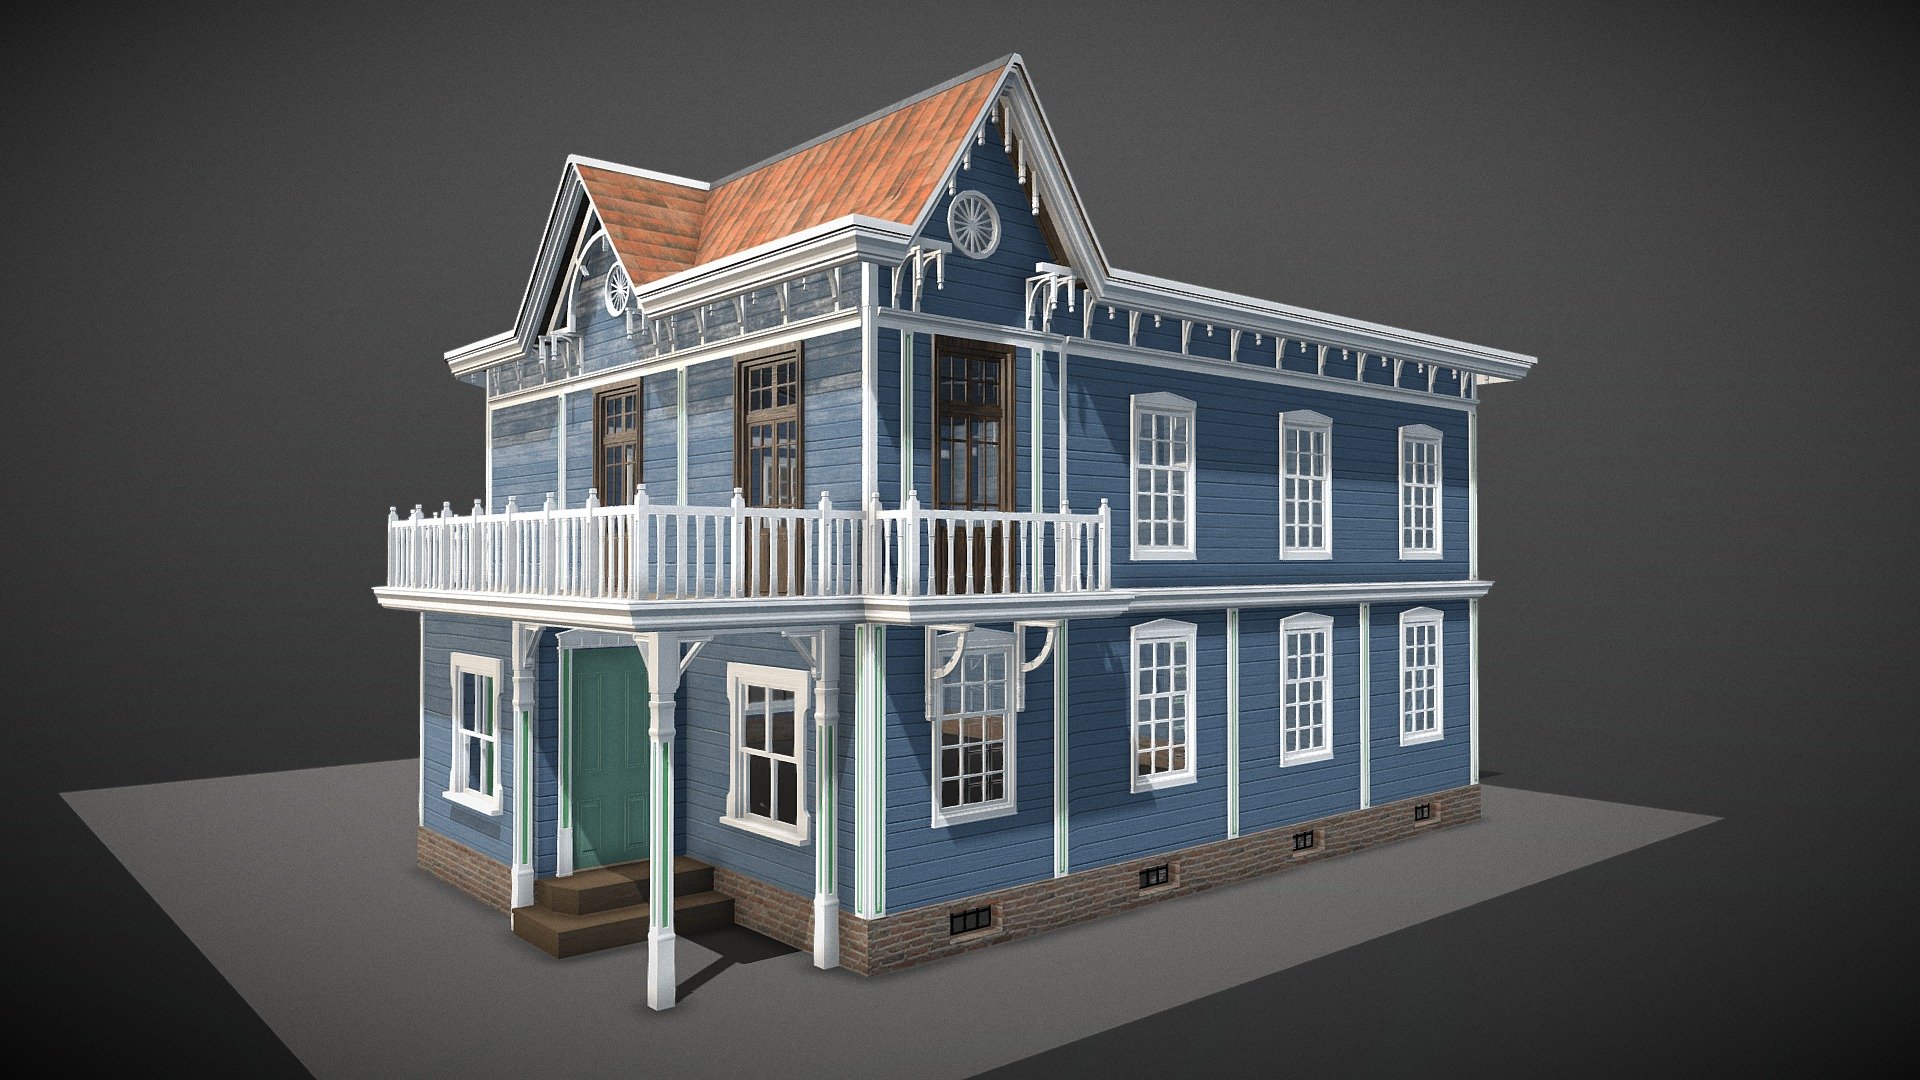 a simple victorian house model, made in blender 2.81. all its textures are 1024 size.
excelent for enviorement purpose 3d model